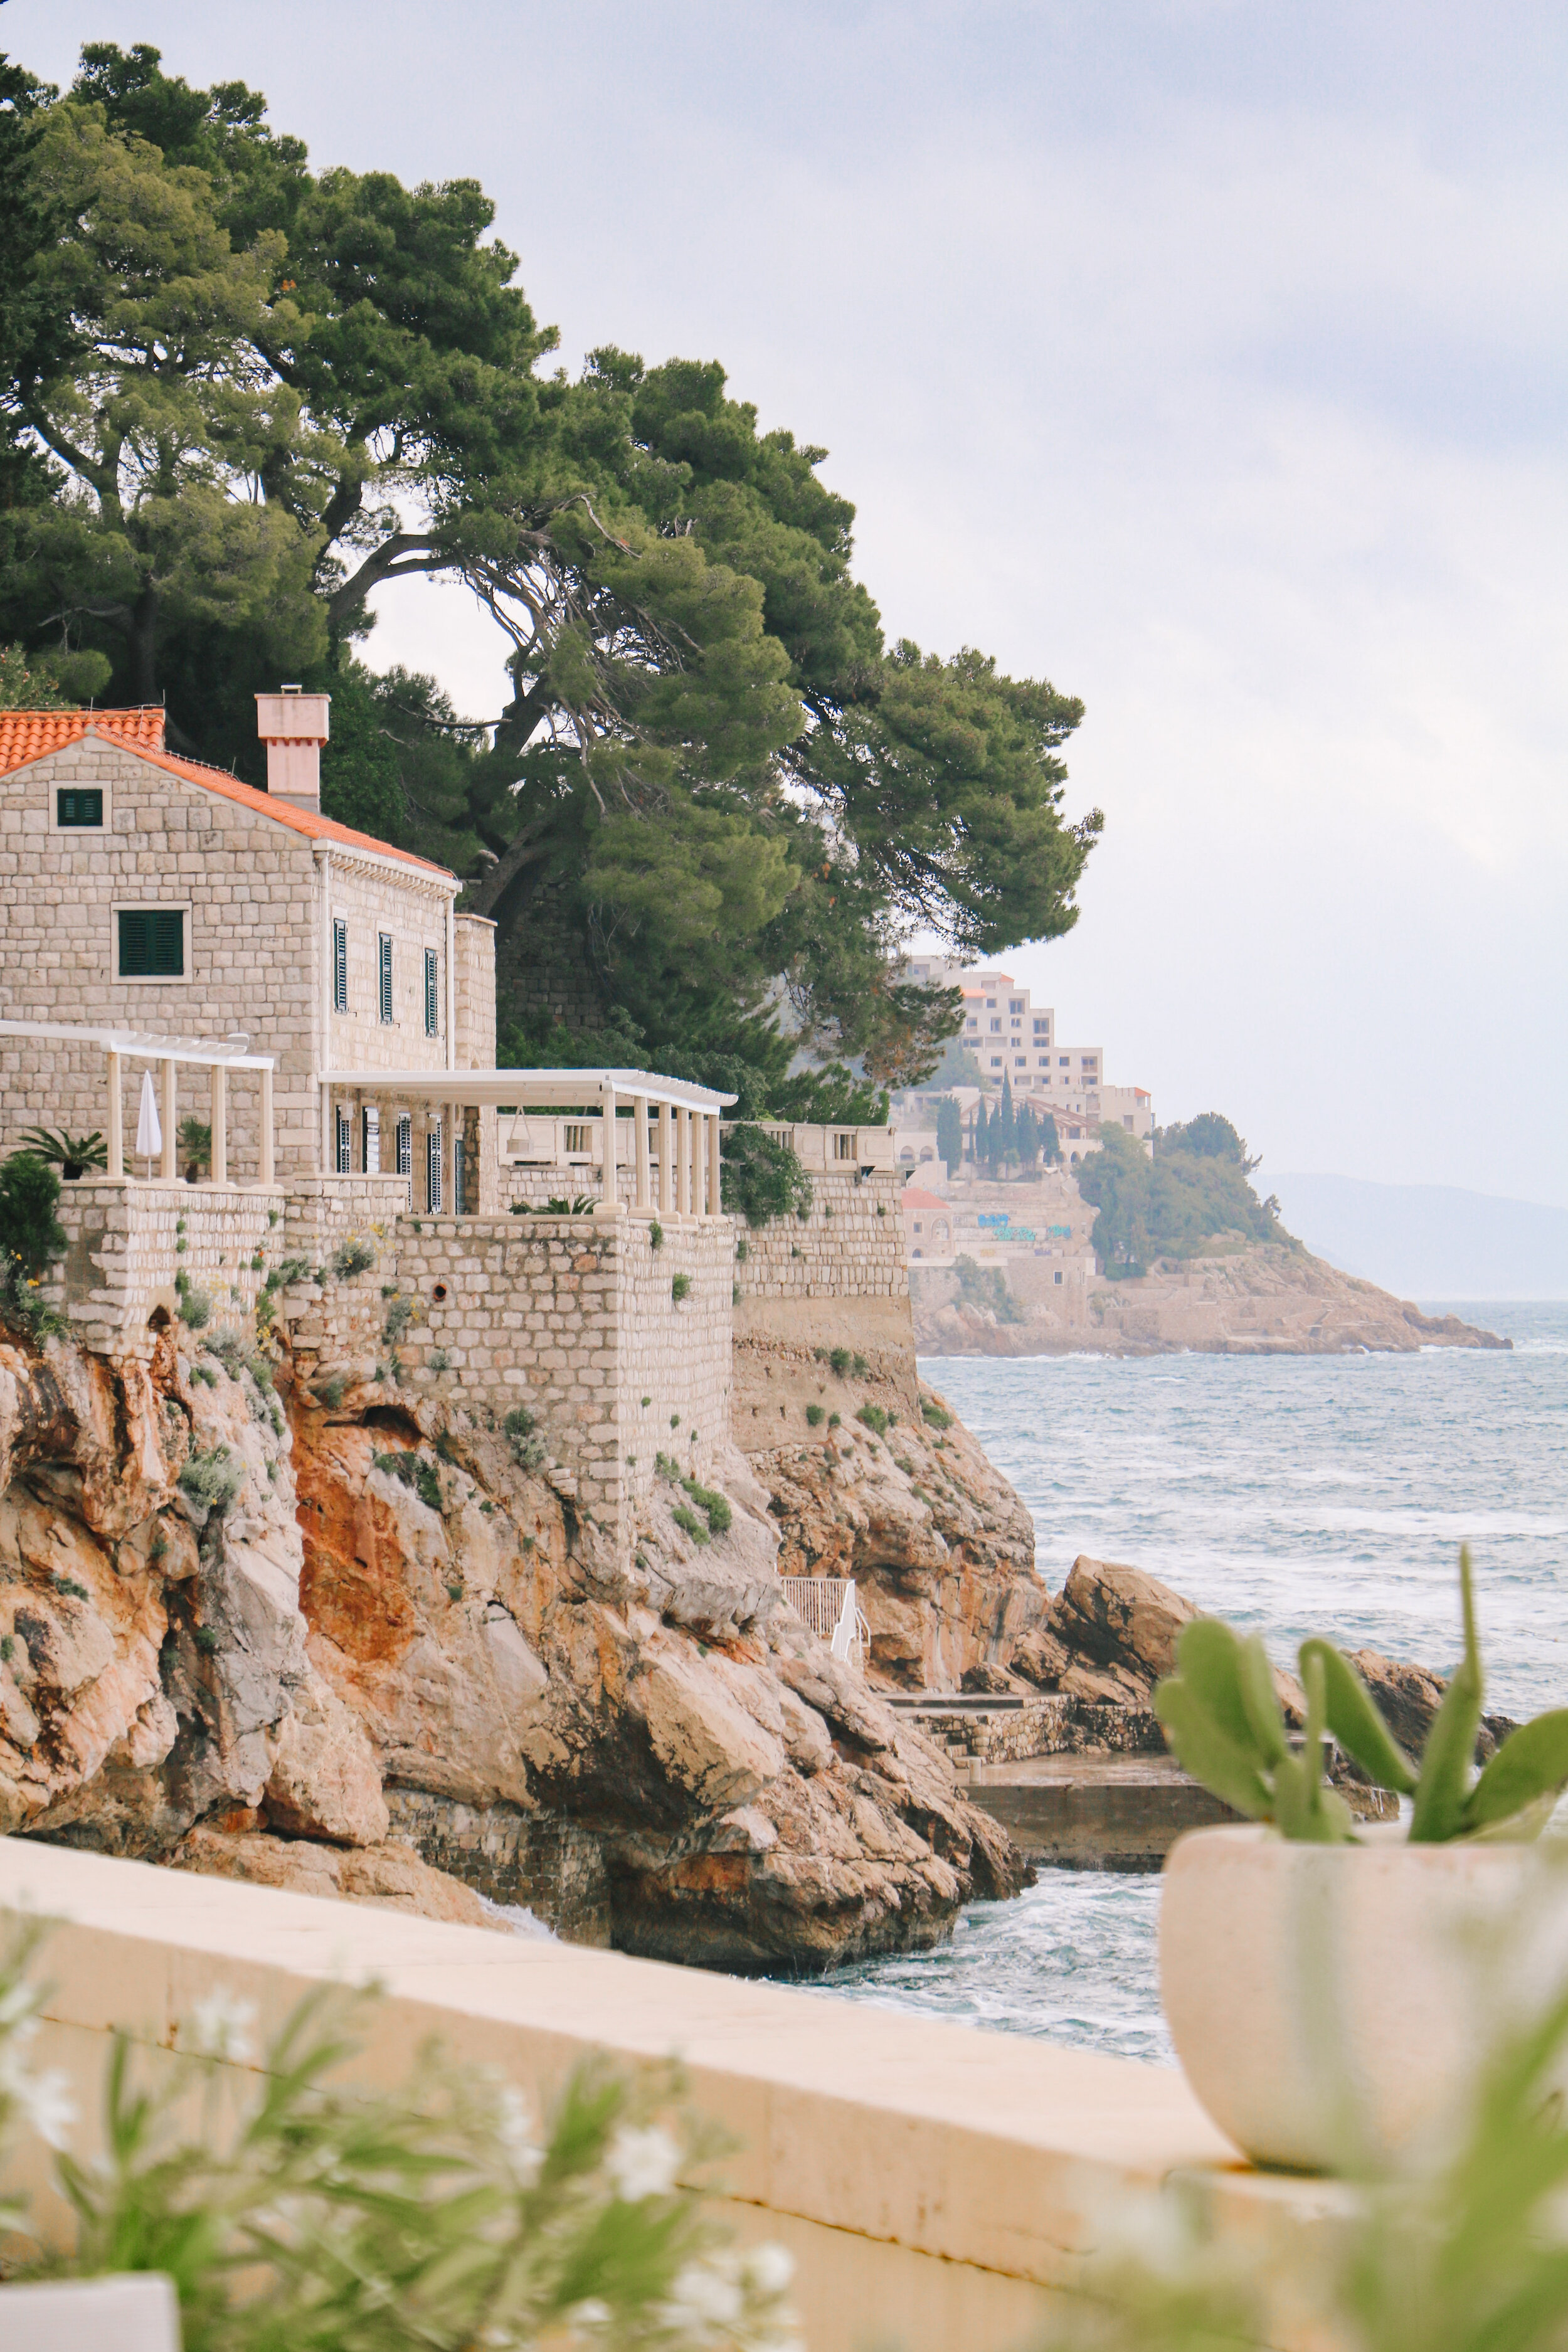 72 Hours in Dubrovnik, Croatia: My Travel Guide To The Pearl Of The Adriatic